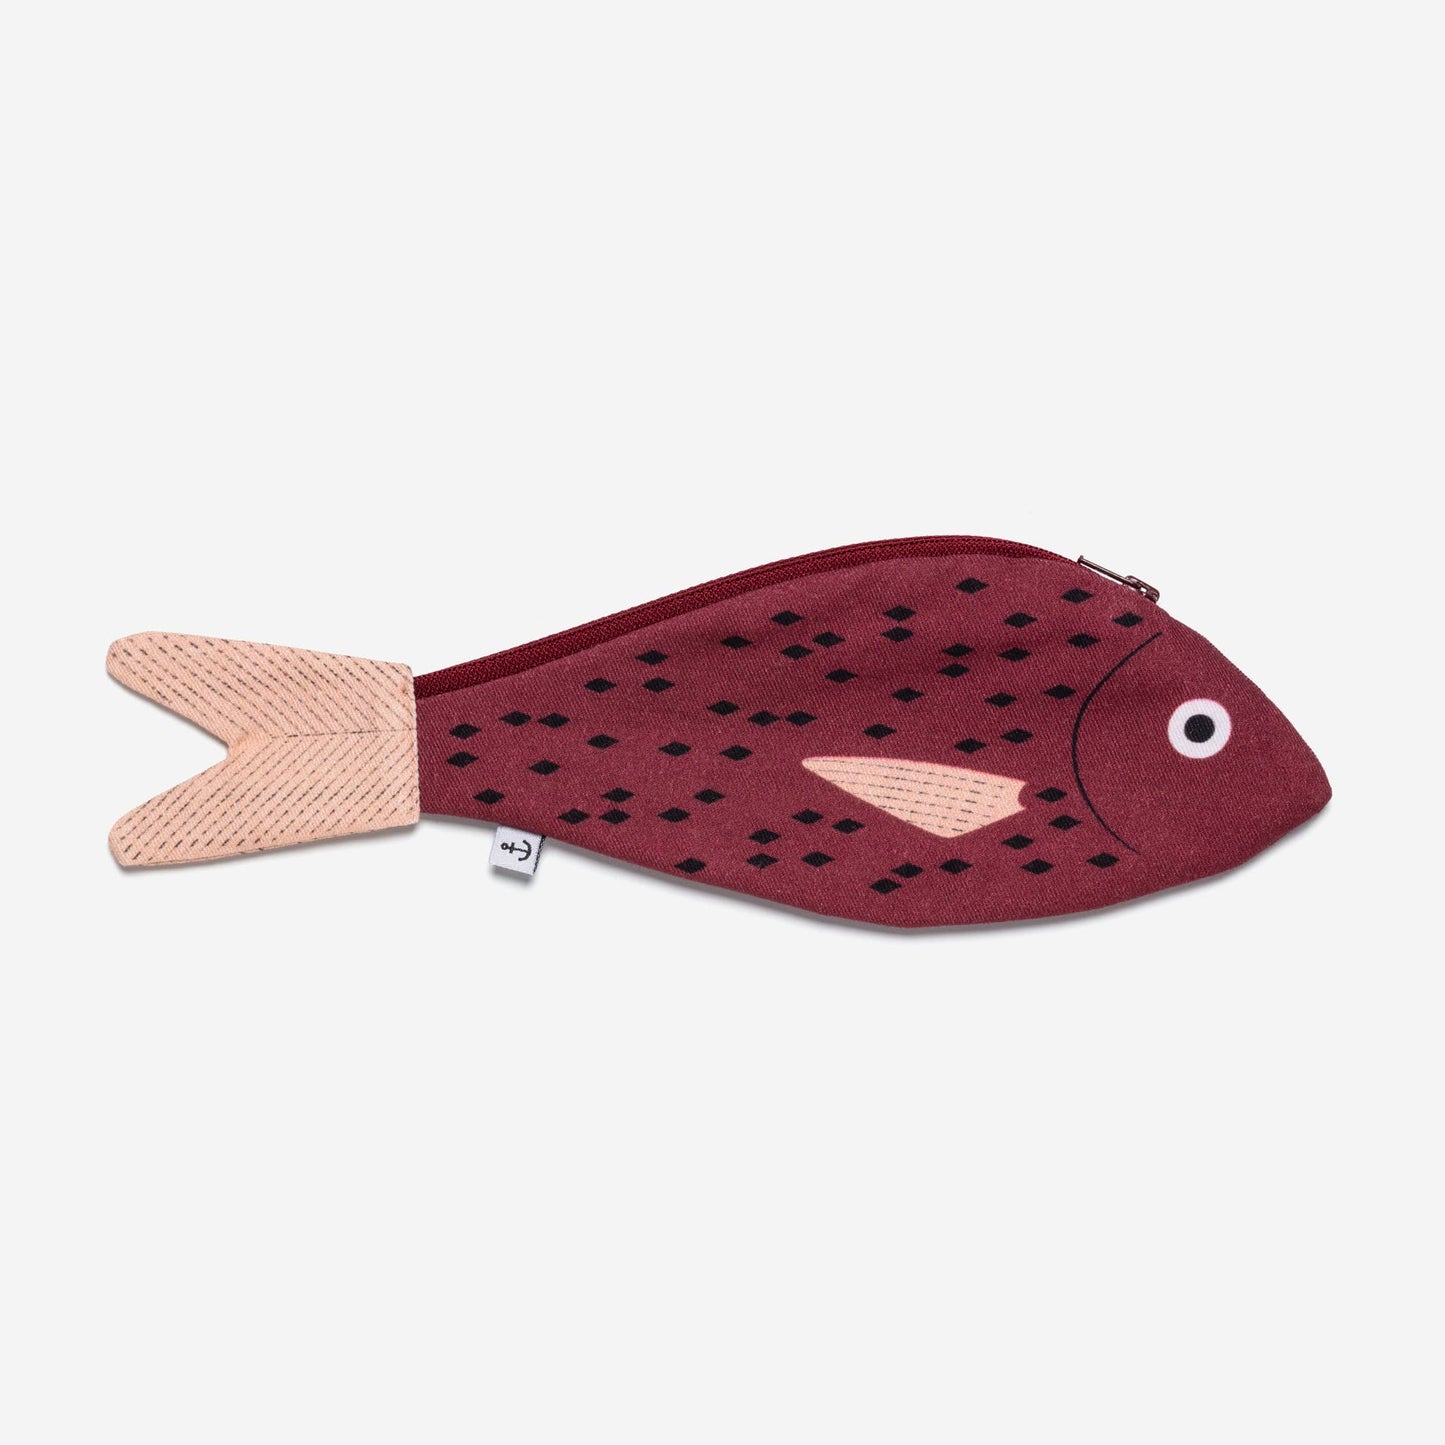 Goldfish zippered pouch --- body is burgundy with black specks, fins are light pink 